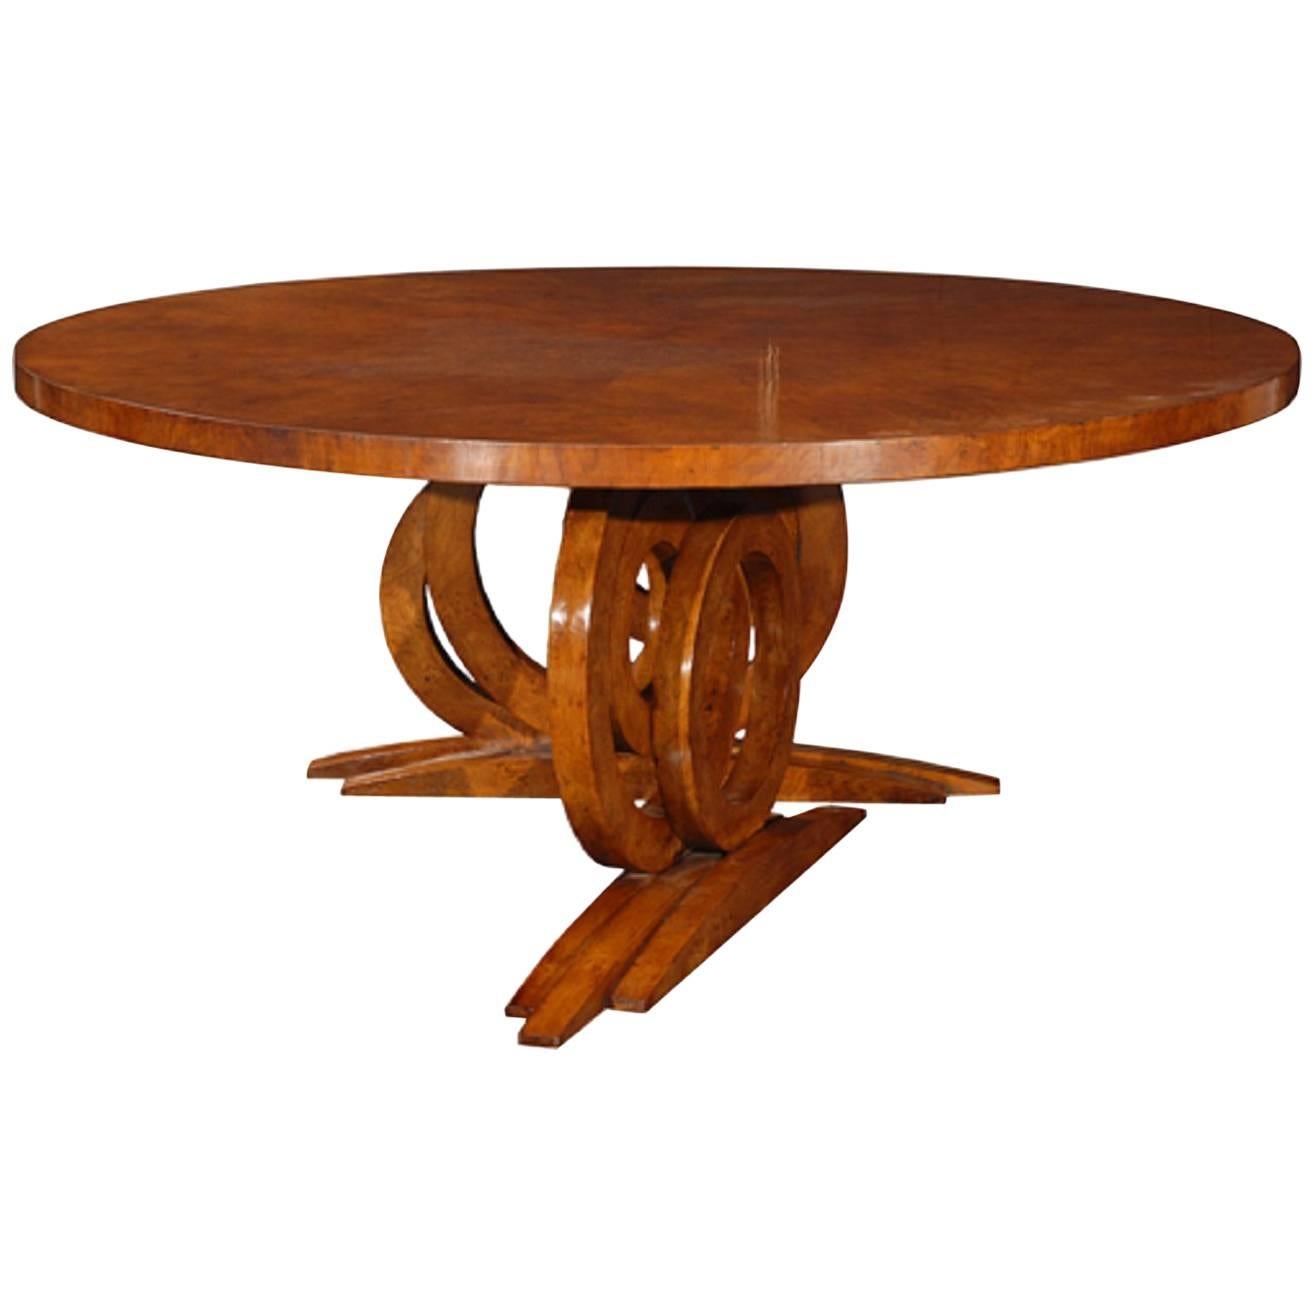 Round Art Deco Dining Table in Walnut Burl Designed by Renaissance Collection For Sale